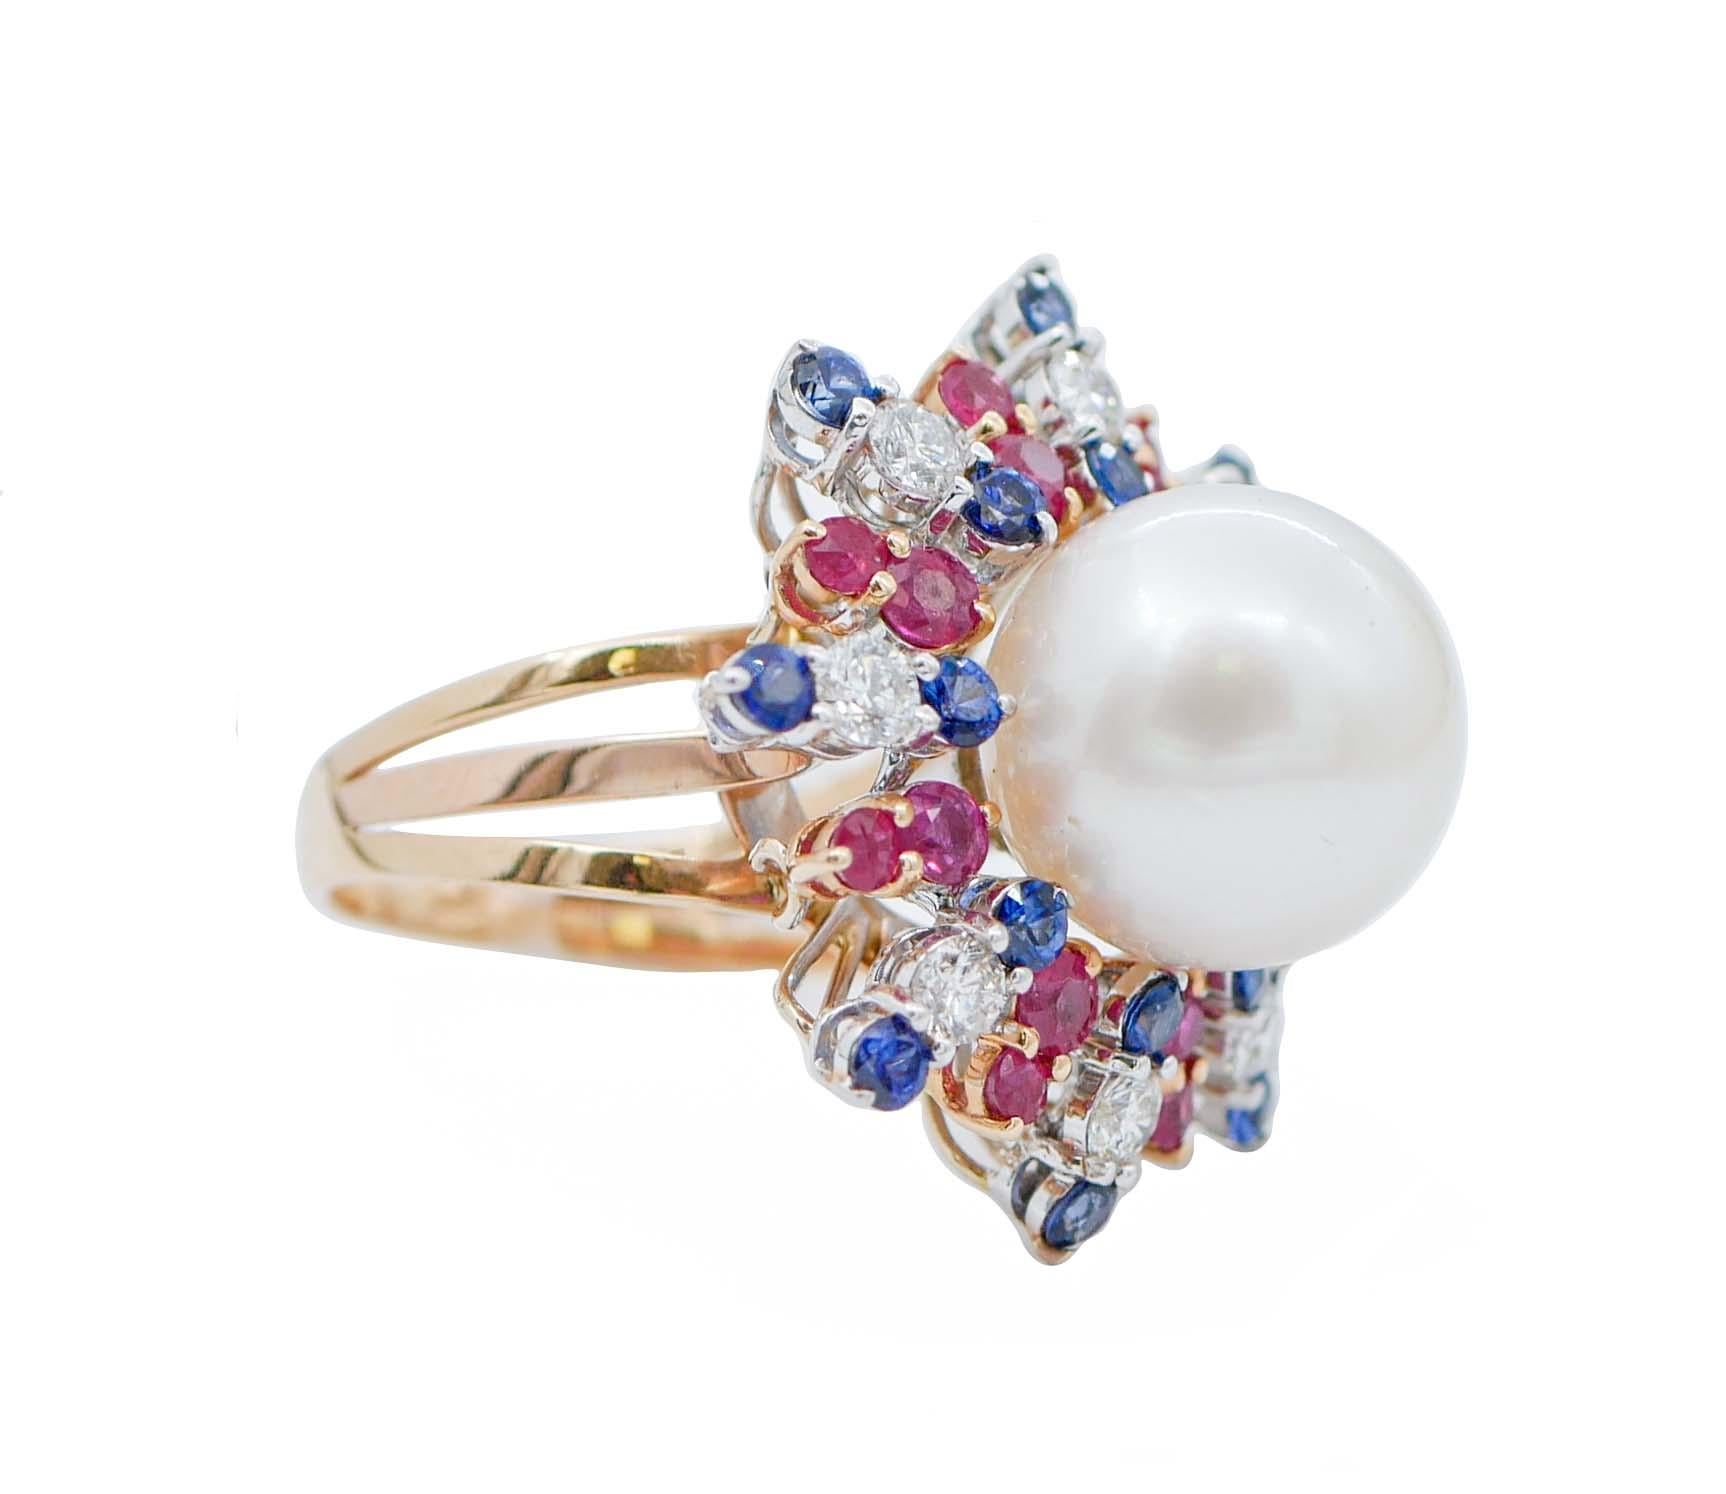 Retro South-Sea Pearl, Rubies, Sapphires, Diamonds, 14 Karat Rose and White Gold Ring For Sale